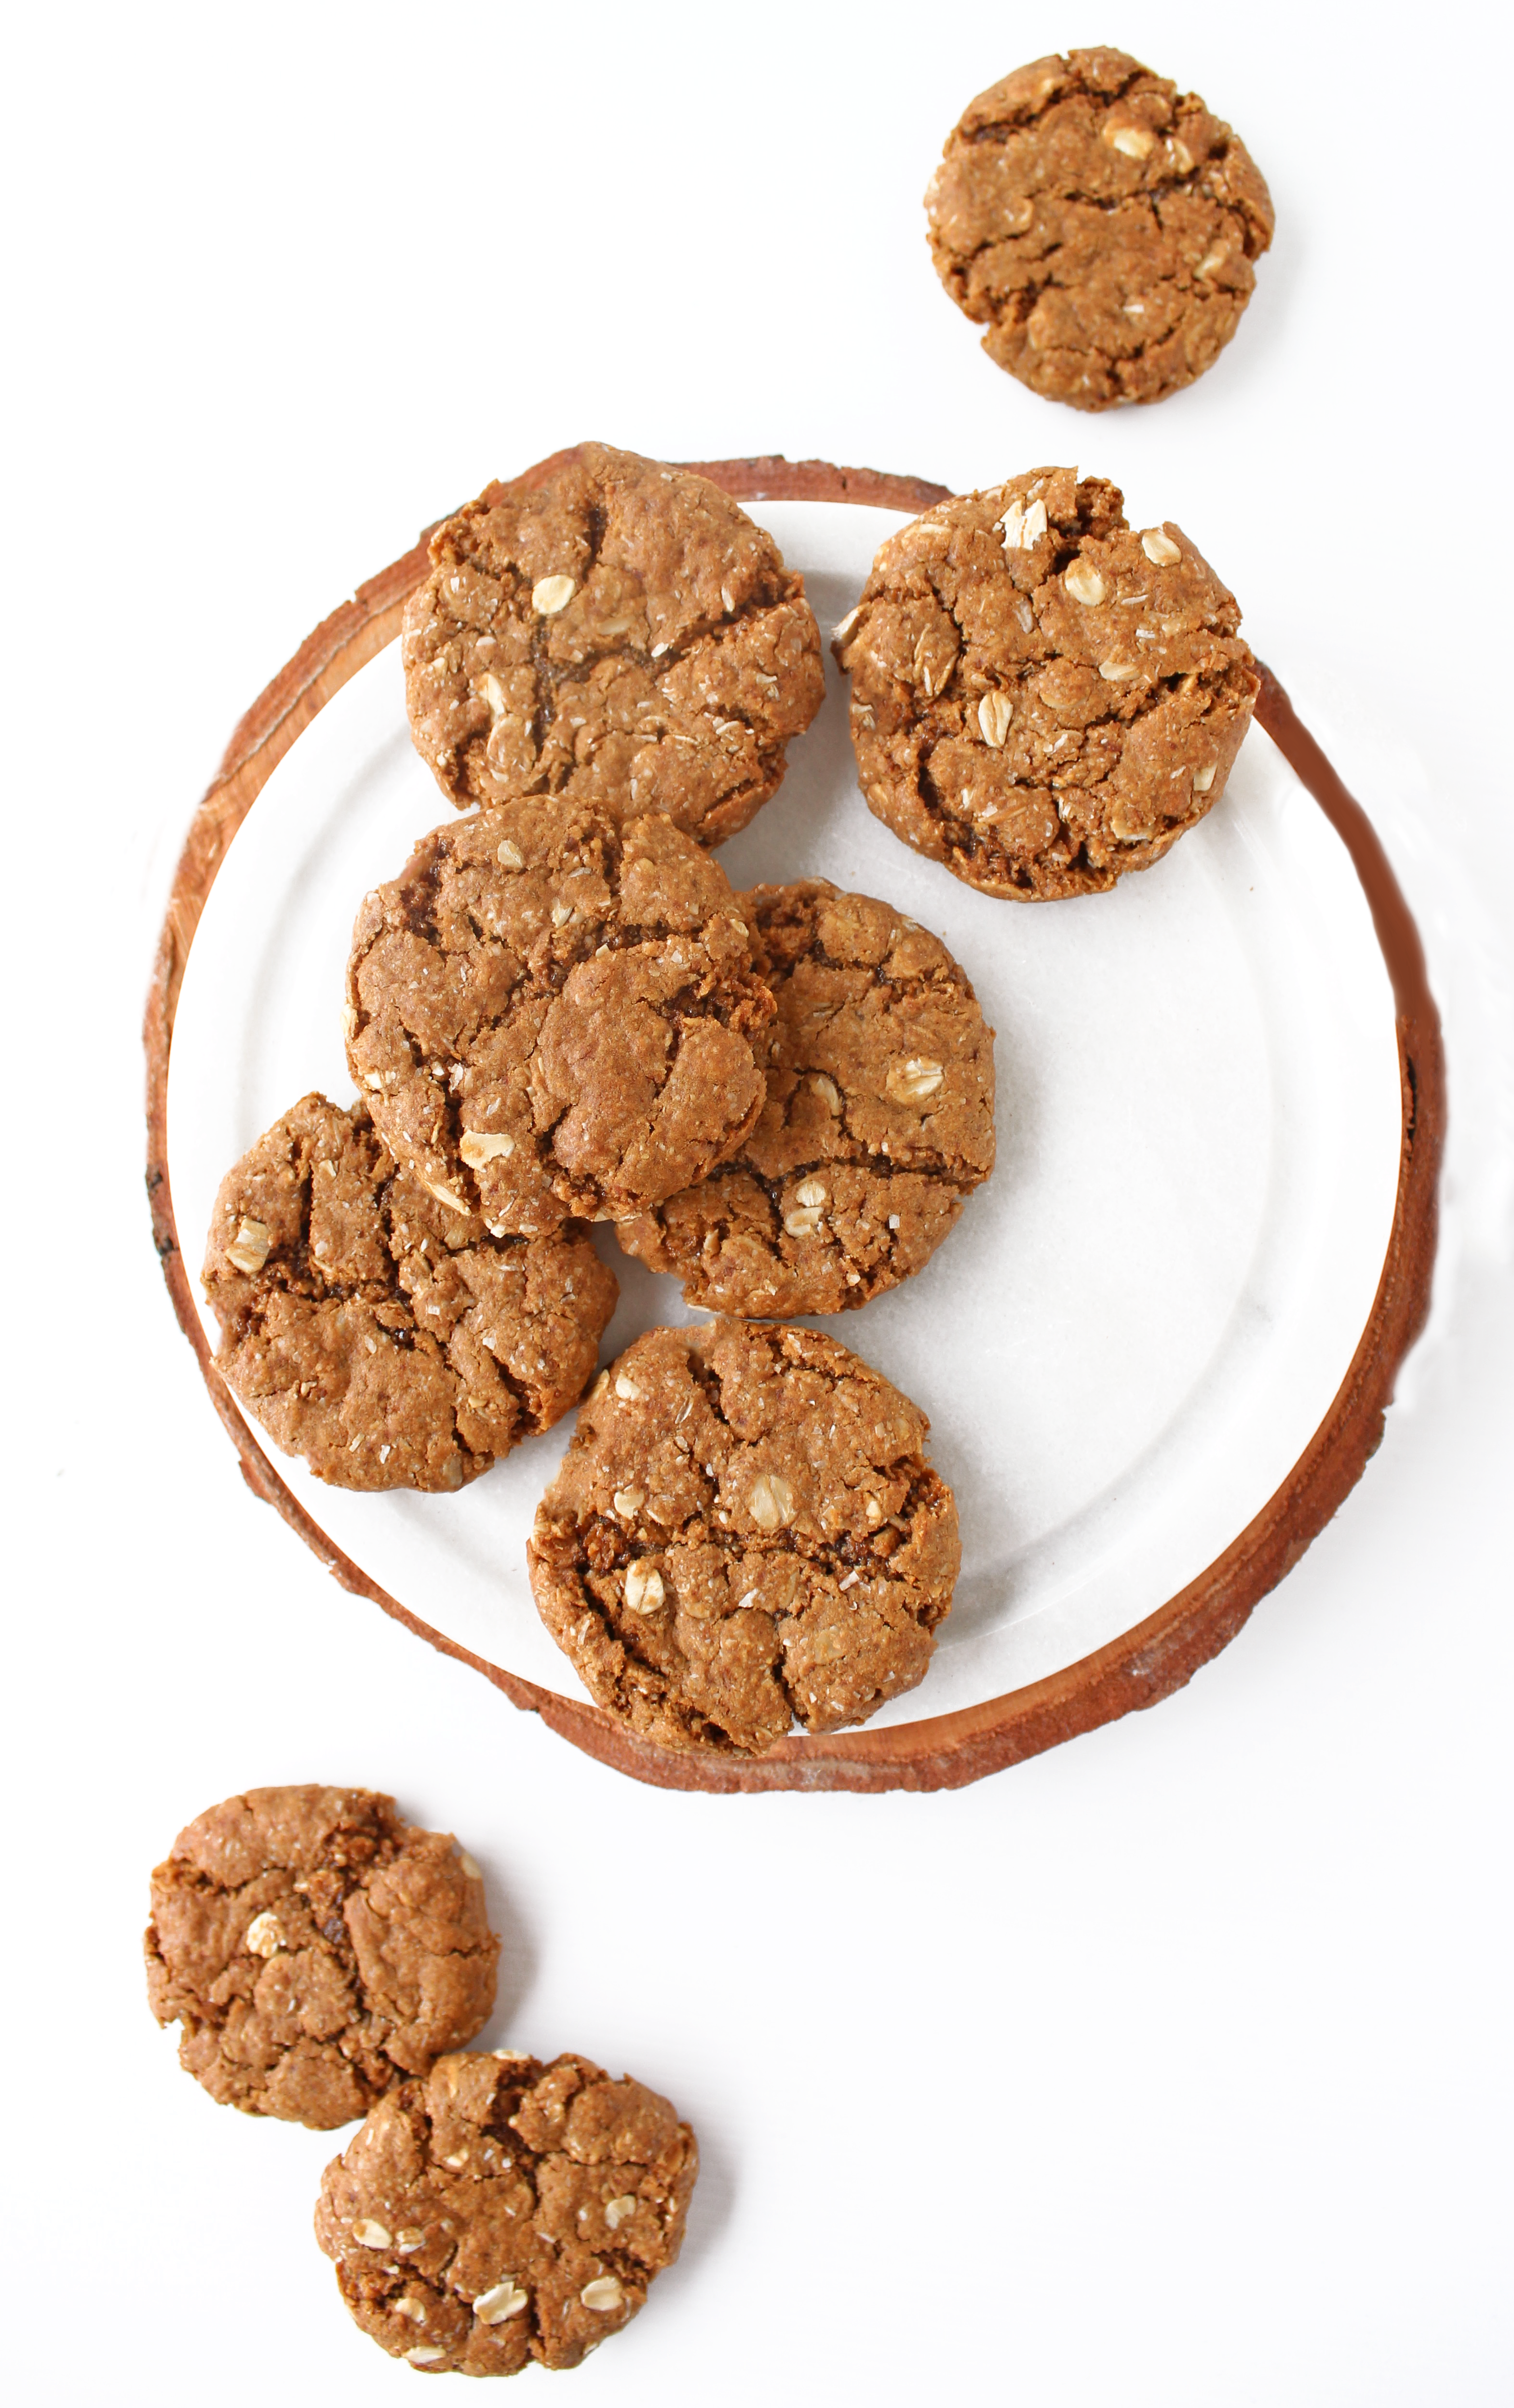 Tasty, chewy, vegan Anzac biscuits that are simple and easy to make. Vegan, gluten free, refined sugar free, egg free, dairy free and still taste like the anzac biscuits you know and love.